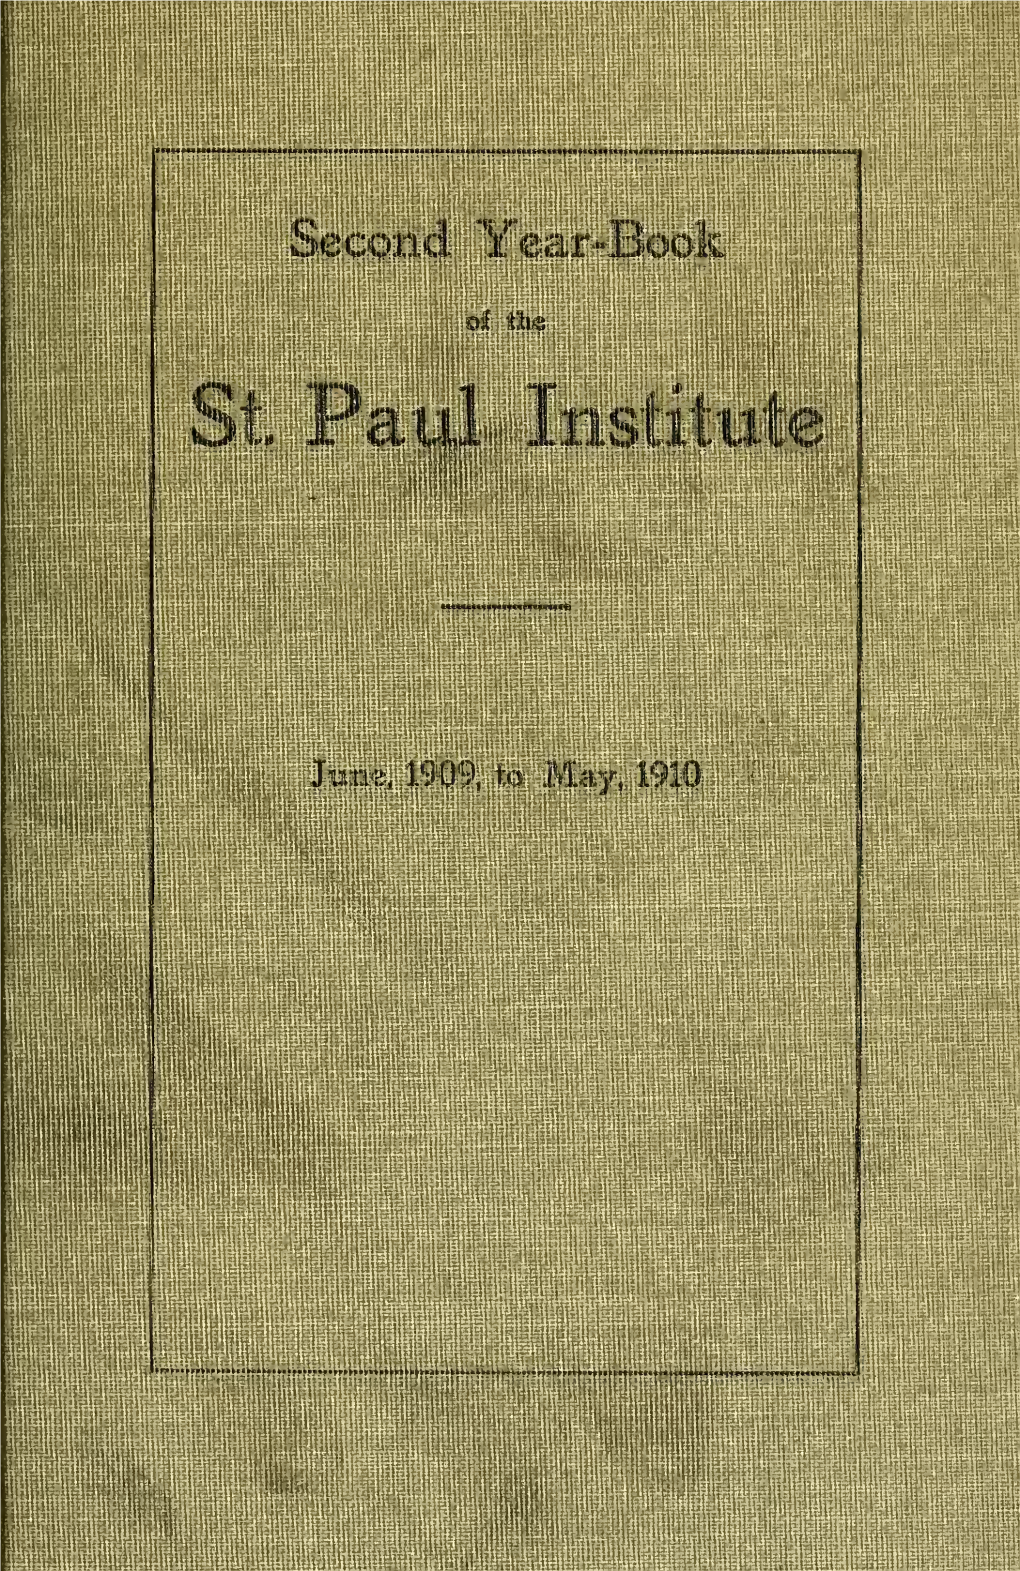 Year-Book of the St. Paul Institute of Arts and Sciences